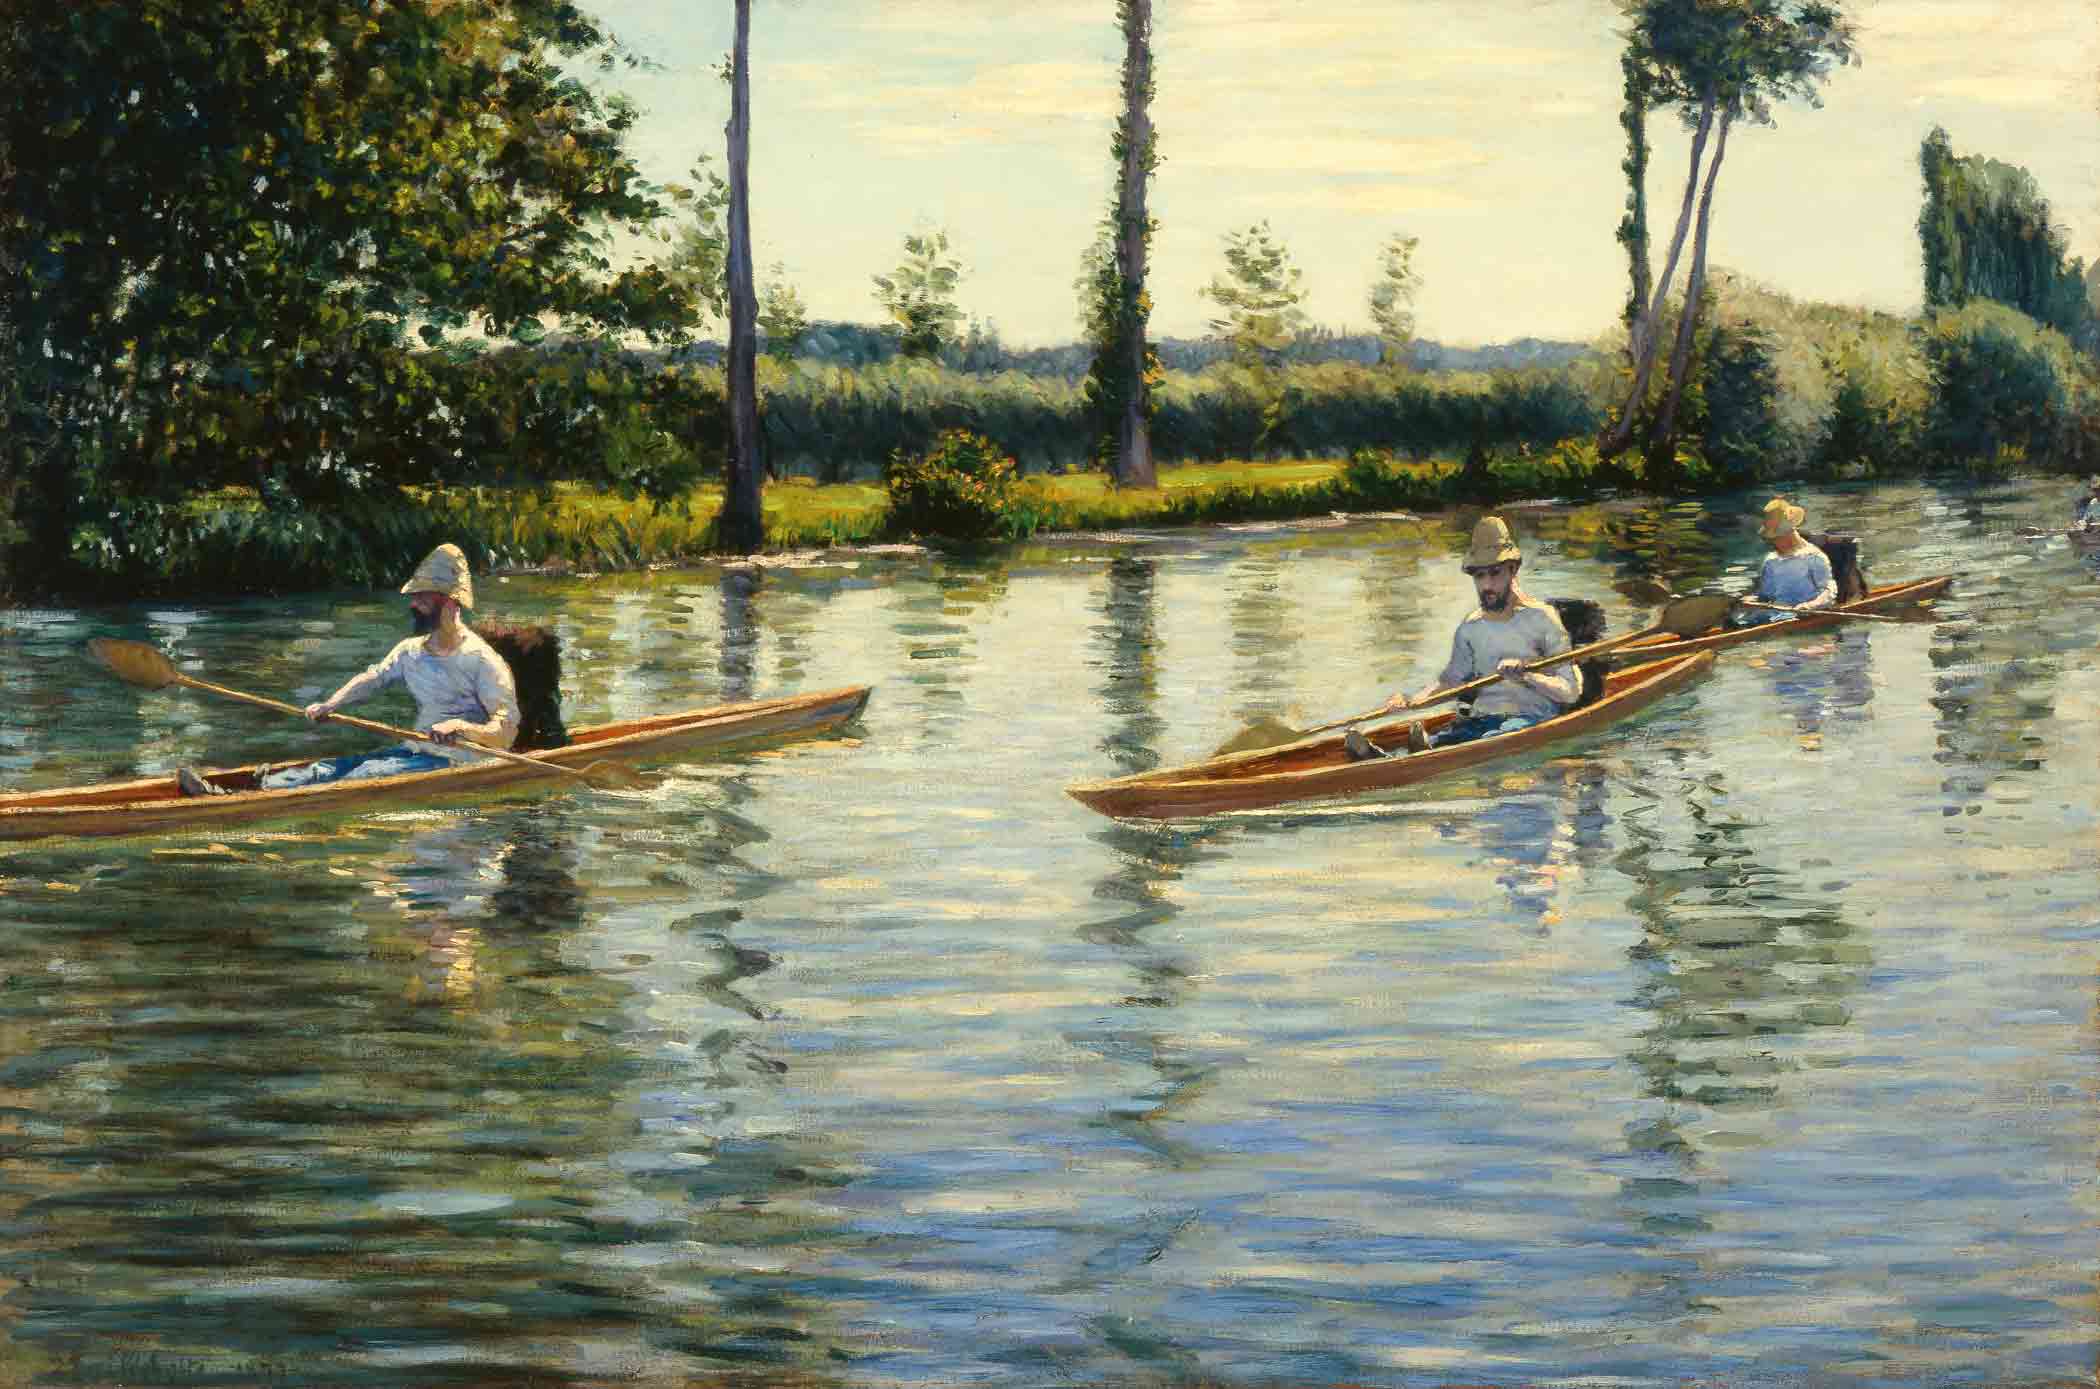 Spływ na Yerres by Gustave Caillebotte - 1877 - 103,5 × 155,9 cm 